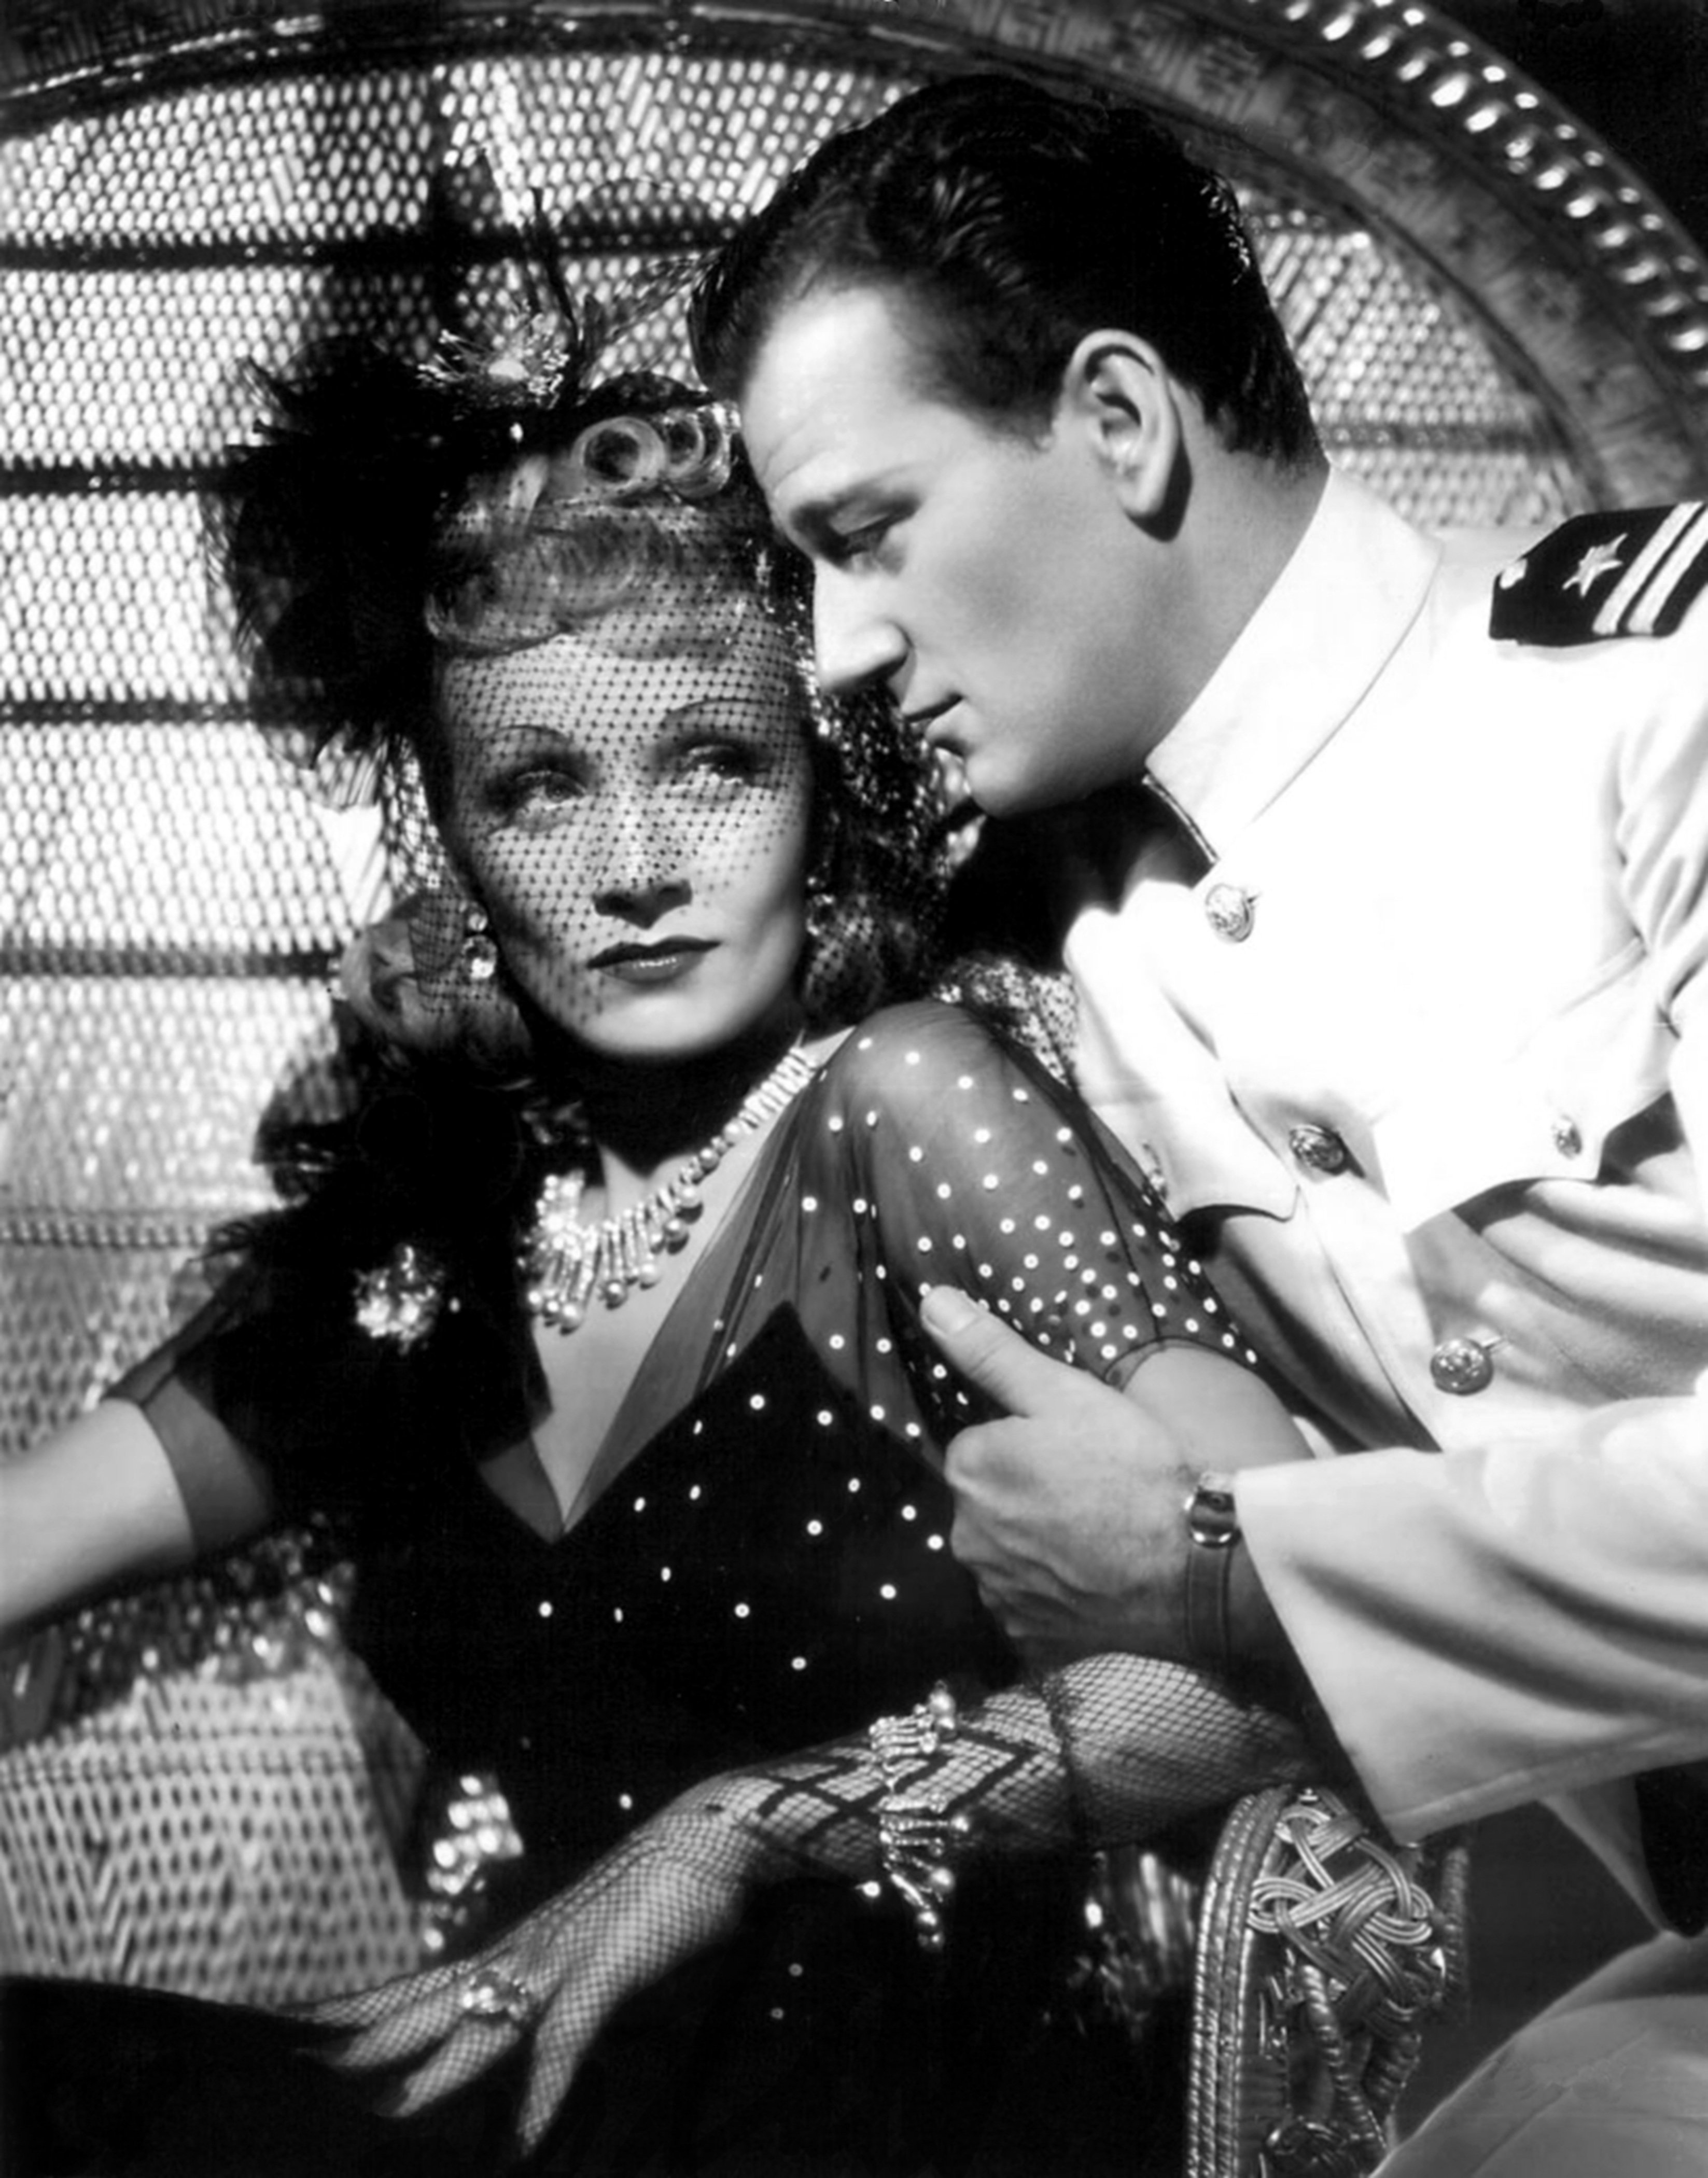 John Wayne and Marlene Dietrich in a scene from the movie "Seven Sinners" | Photo; Donaldson Collection/Getty Images